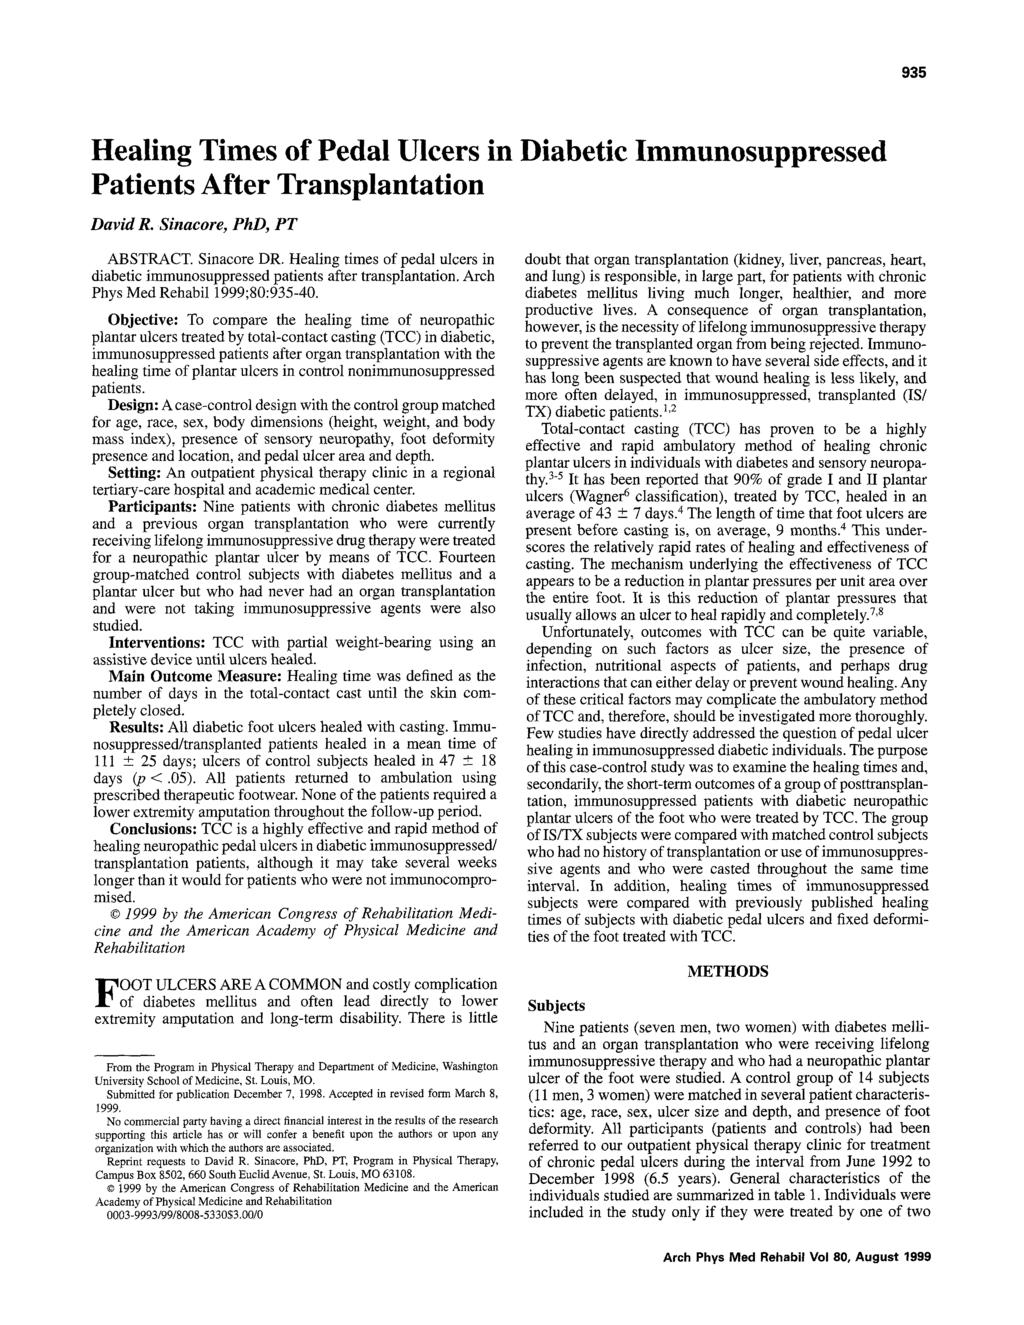 935 Healing Times of Pedal Ulcers in Diabetic Immunosuppressed Patients After Transplantation David R. Sinacore, PhD, PT ABSTRACT. Sinacore DR.